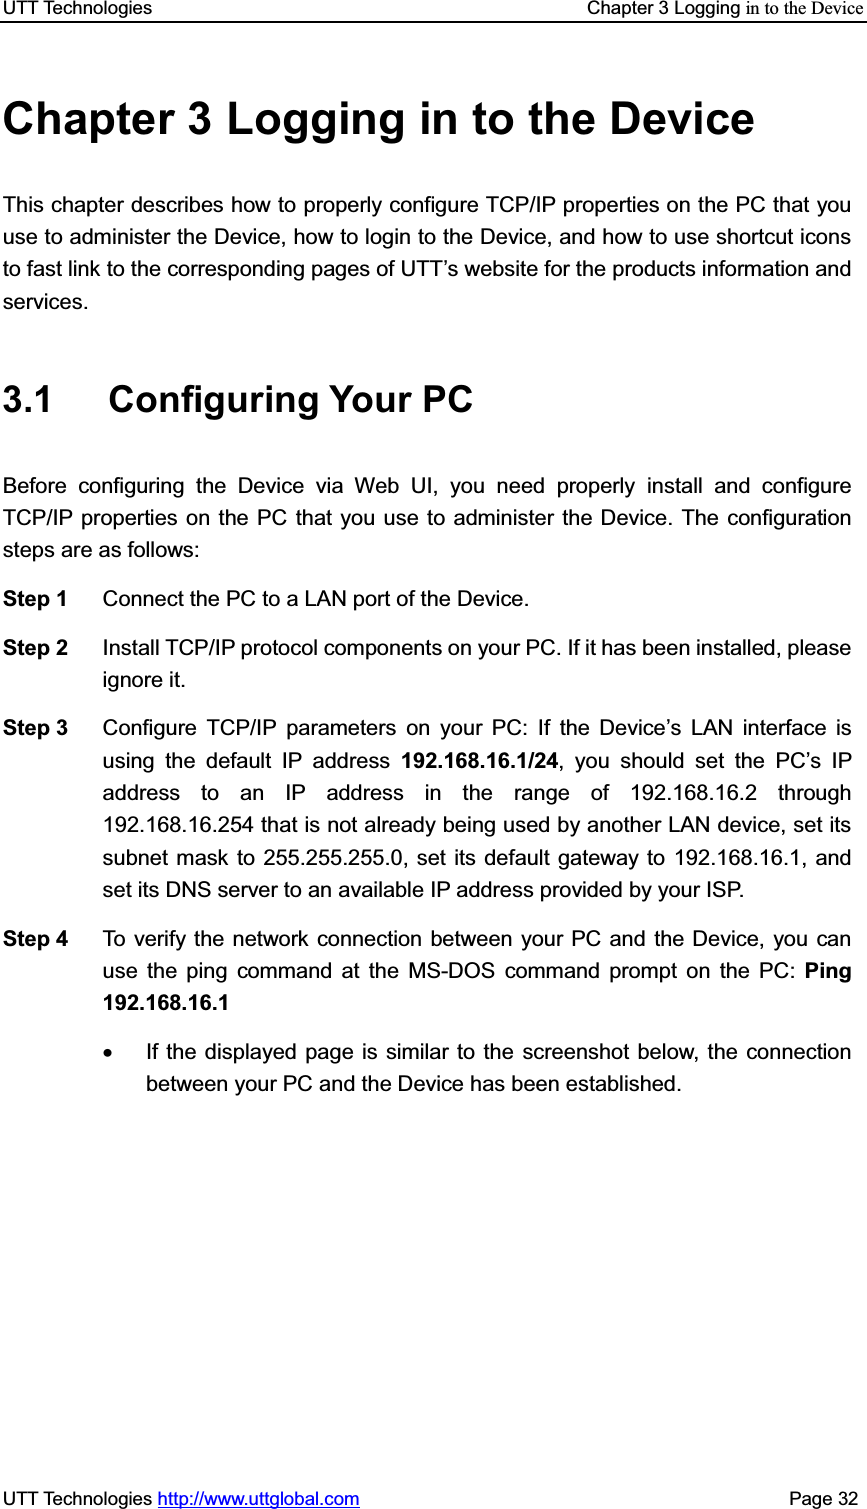 UTT Technologies    Chapter 3 Logging in to the DeviceUTT Technologies http://www.uttglobal.com                                              Page 32 Chapter 3 Logging in to the Device This chapter describes how to properly configure TCP/IP properties on the PC that youuse to administer the Device, how to login to the Device, and how to use shortcut icons to fast link to the corresponding pages of UTT¶s website for the products information and services. 3.1 Configuring Your PC Before configuring the Device via Web UI, you need properly install and configure TCP/IP properties on the PC that you use to administer the Device. The configuration steps are as follows:   Step 1  Connect the PC to a LAN port of the Device.   Step 2  Install TCP/IP protocol components on your PC. If it has been installed, please ignore it. Step 3  Configure TCP/IP parameters on your PC: If the Device¶s LAN interface is using the default IP address 192.168.16.1/24, you should set the PC¶s IP address to an IP address in the range of 192.168.16.2 through 192.168.16.254 that is not already being used by another LAN device, set its subnet mask to 255.255.255.0, set its default gateway to 192.168.16.1, and set its DNS server to an available IP address provided by your ISP. Step 4  To verify the network connection between your PC and the Device, you can use the ping command at the MS-DOS command prompt on the PC: Ping 192.168.16.1x  If the displayed page is similar to the screenshot below, the connection between your PC and the Device has been established. 